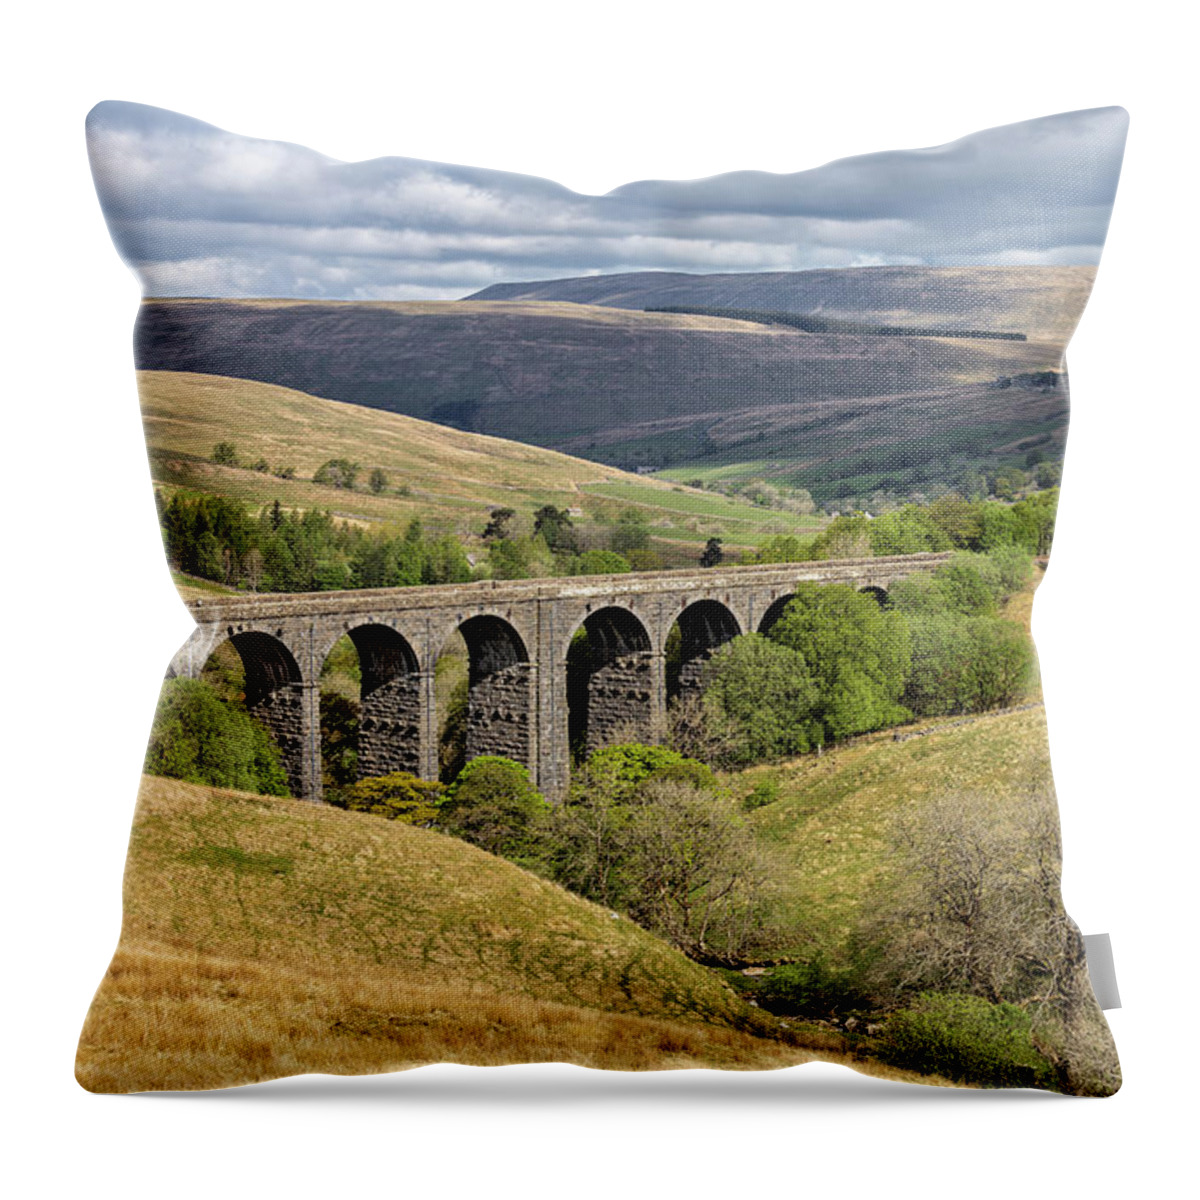 Arch Throw Pillow featuring the photograph Dent Head Viaduct, Dentdale by Tom Holmes Photography